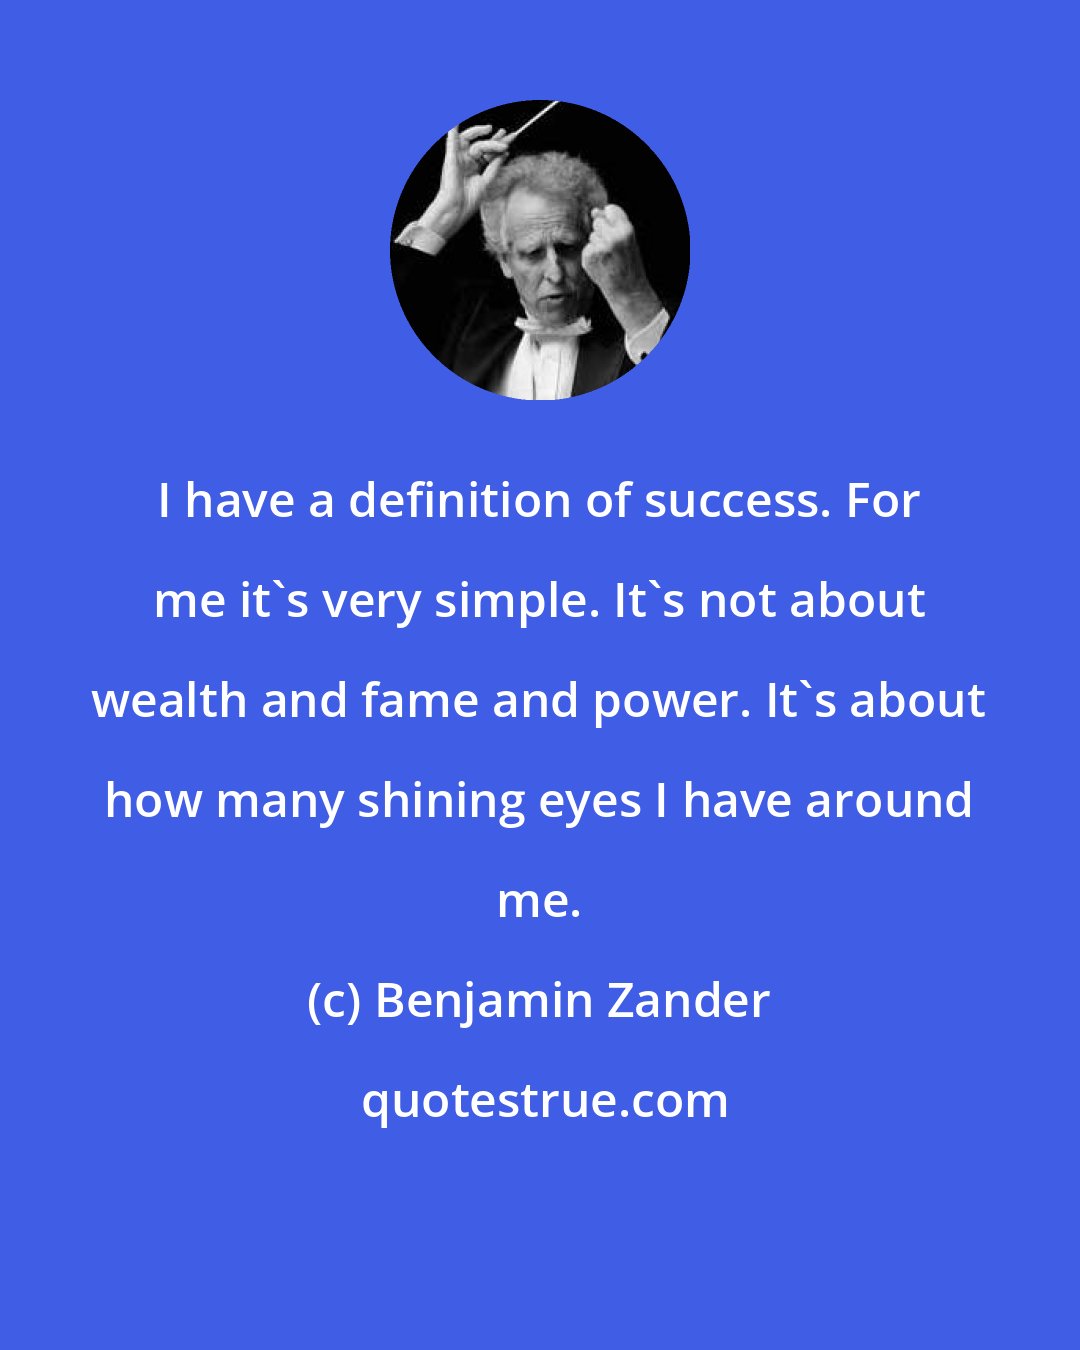 Benjamin Zander: I have a definition of success. For me it's very simple. It's not about wealth and fame and power. It's about how many shining eyes I have around me.